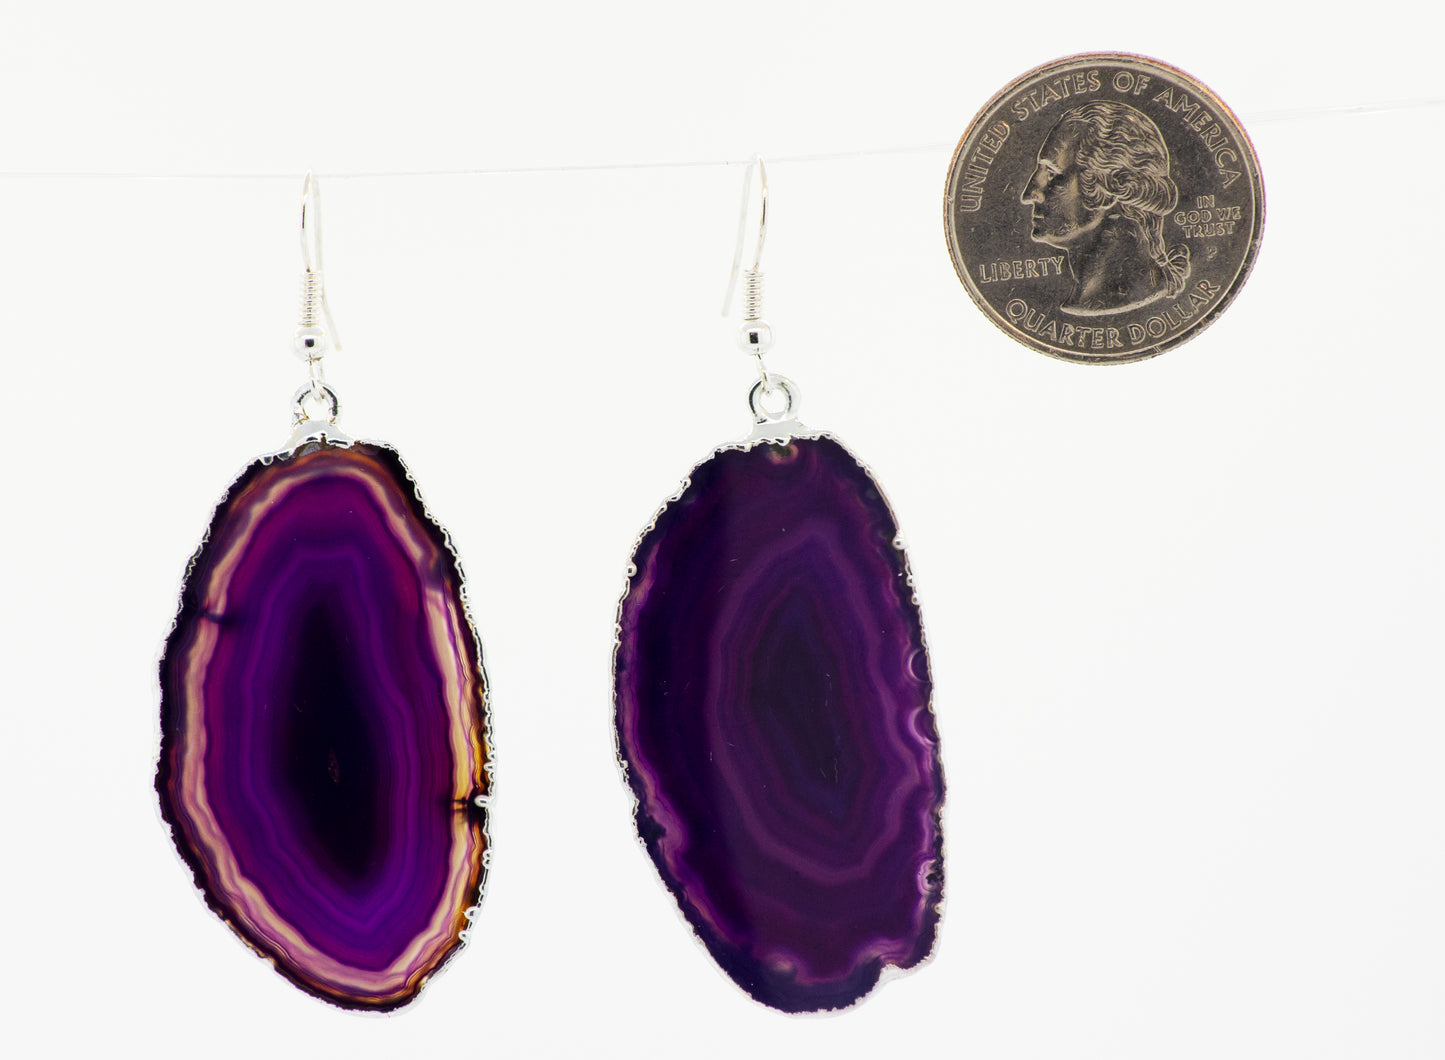 A purple slice of Super Silver dyed agate slice earrings, bordered by a silver-plated border, hanging from a string.